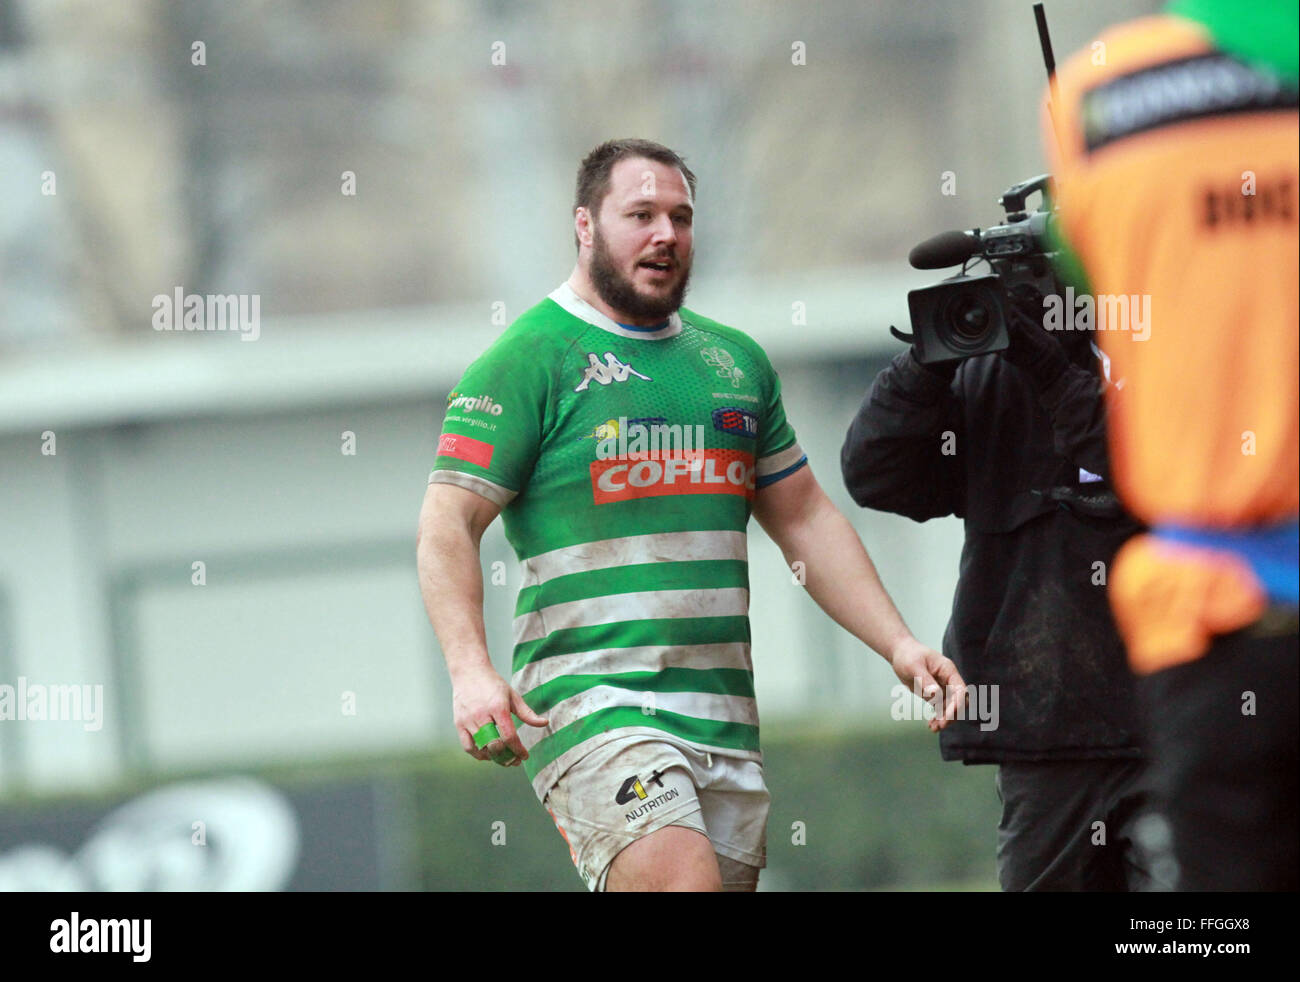 Treviso, Italy. 13th Feb, 2016. Benetton Treviso's player Alberto De Marchi  leave the field during Rugby Guinness Pro12 match between Benetton Treviso  and Cardiff Blues . Benetton Treviso beats Cardiff Blues 13-7